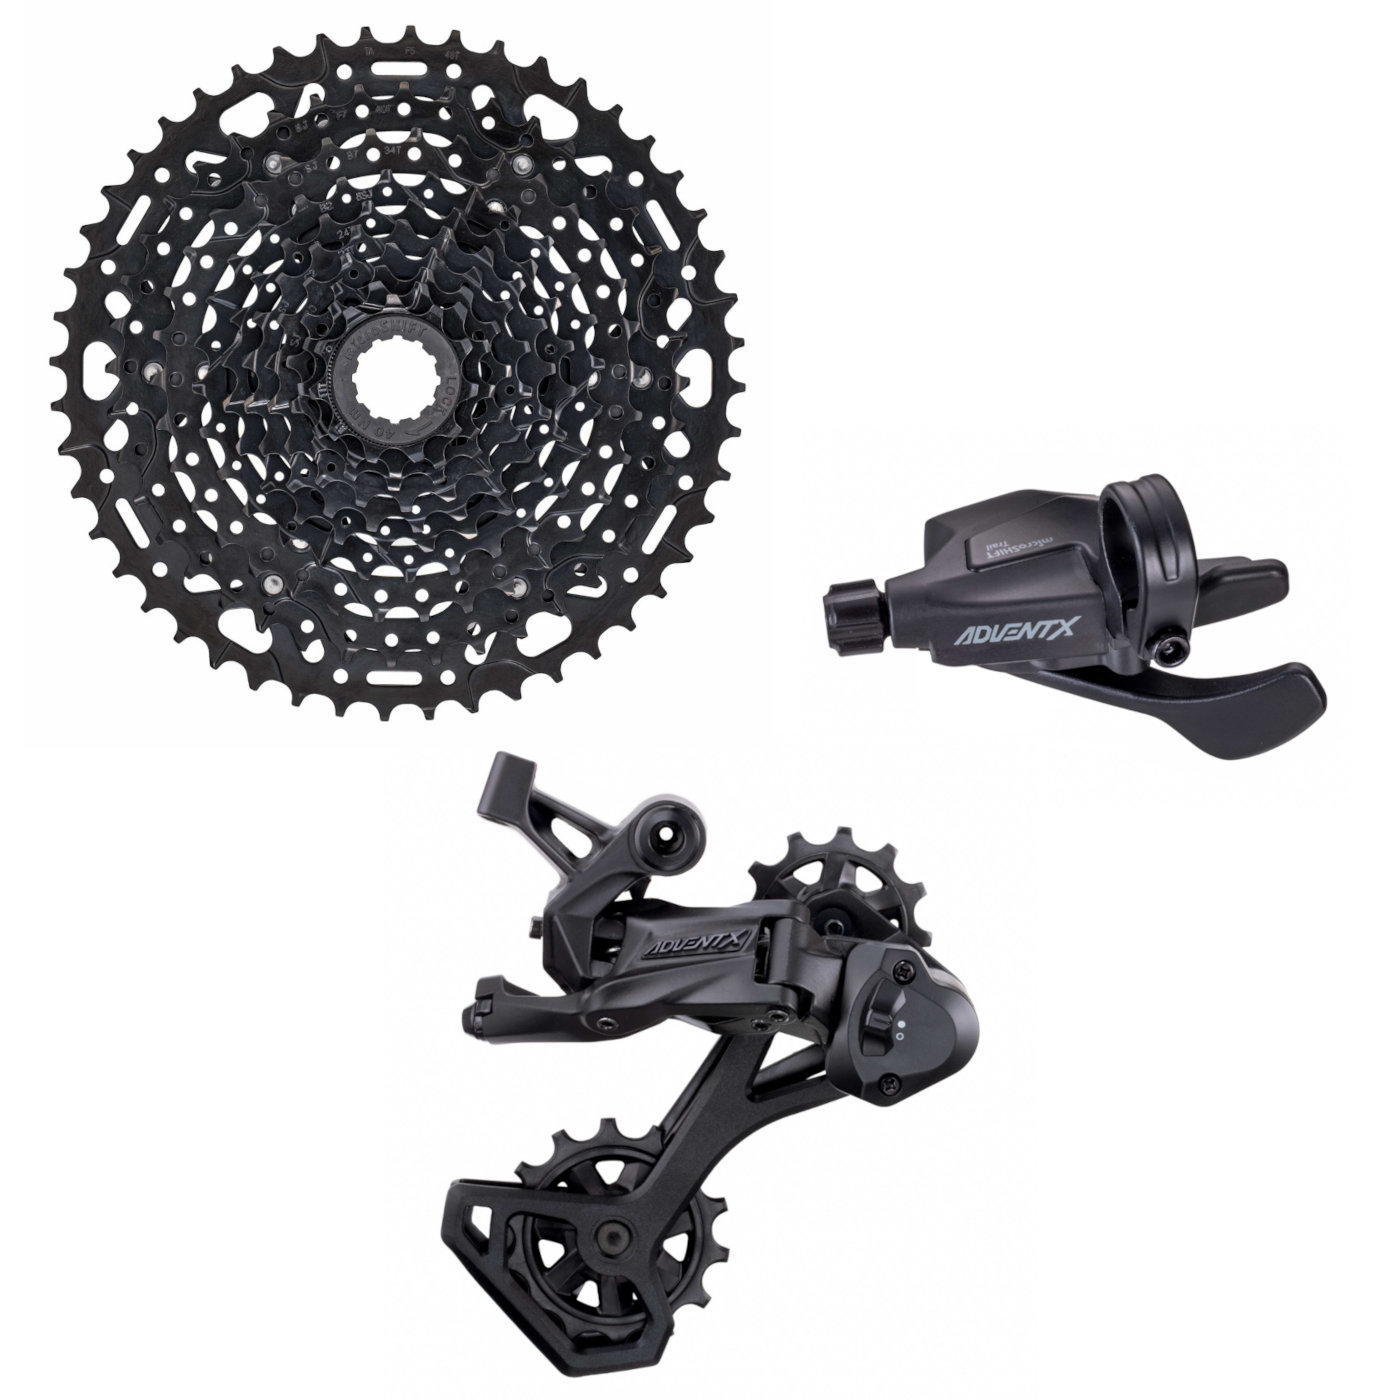 Productfoto van microSHIFT ADVENT X Group with Flatbar Shifter - 1x10-speed